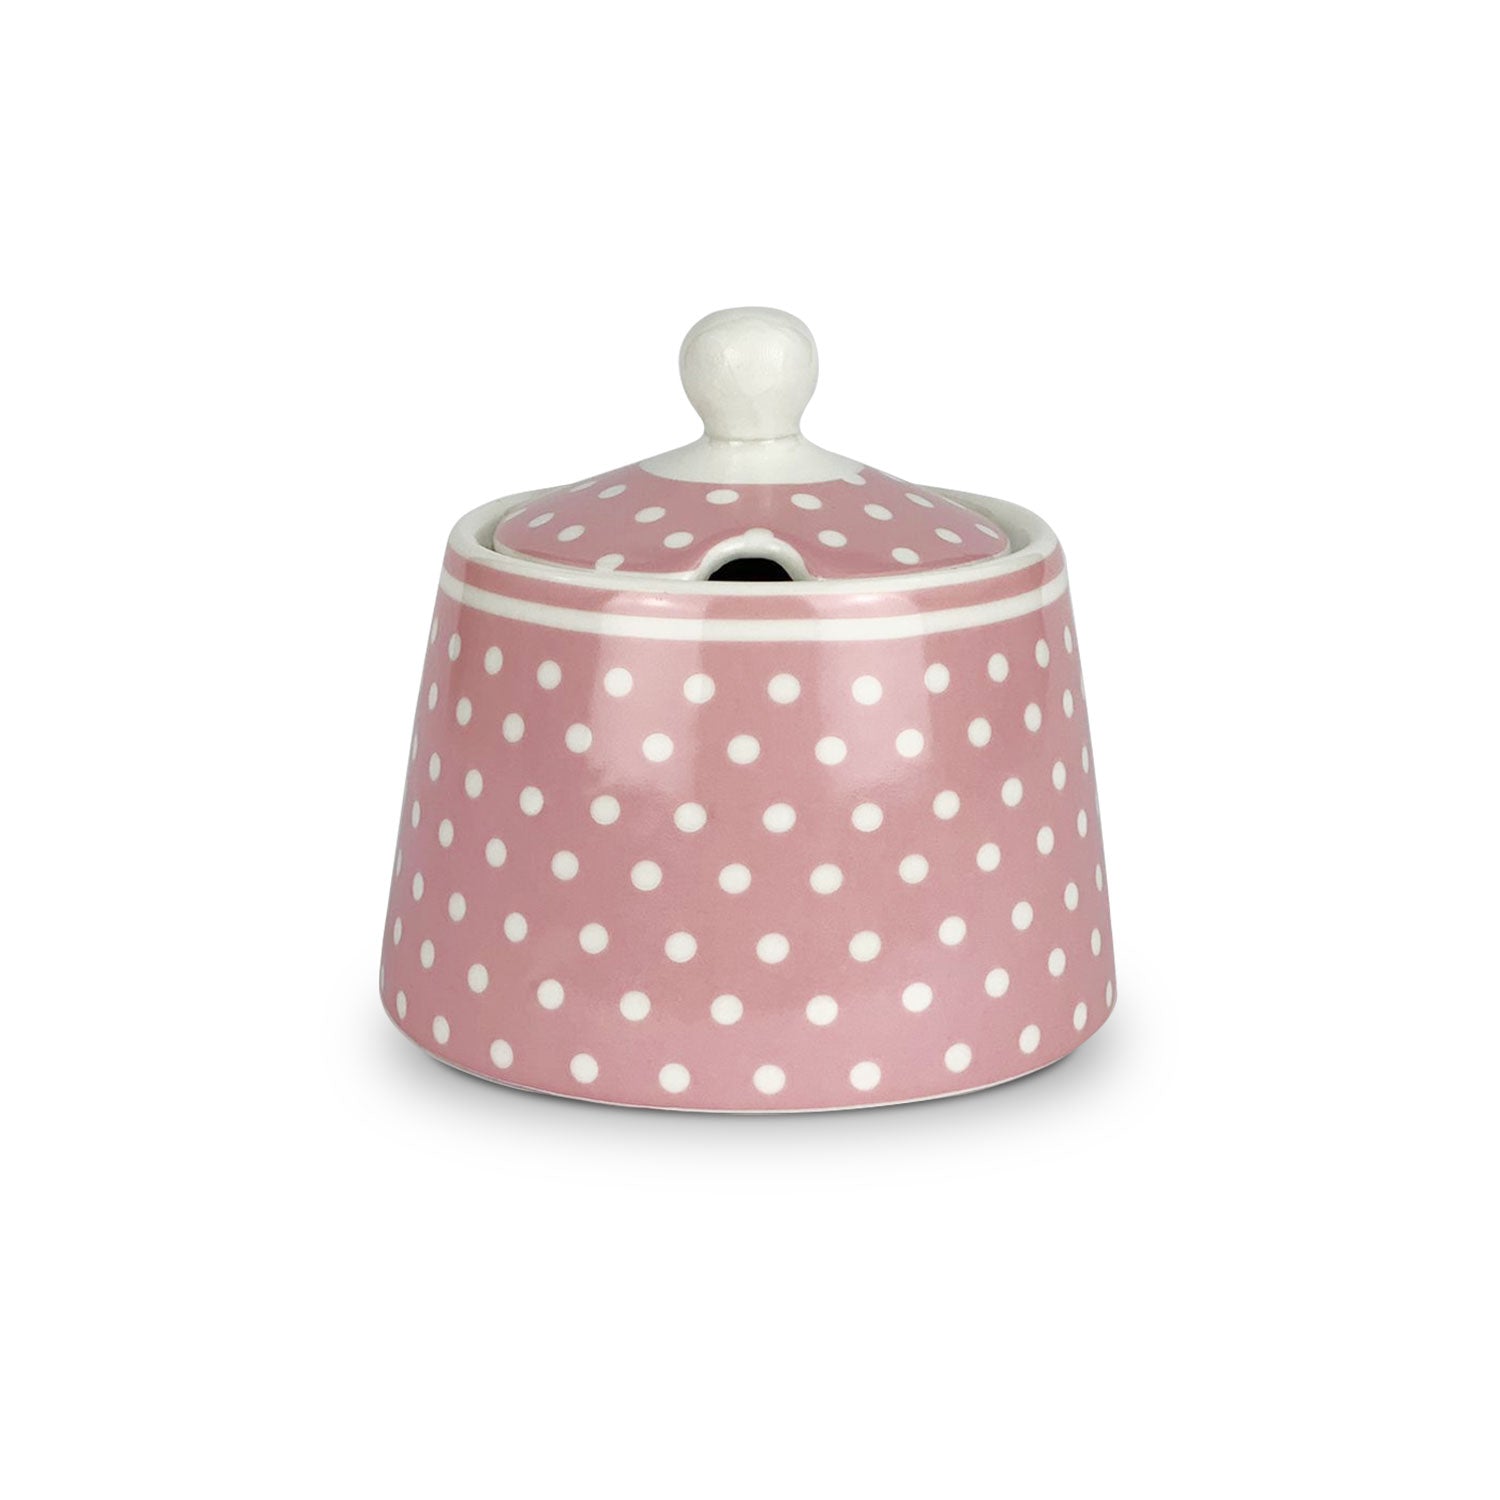 Zuccheriera in porcellana Isabelle Rose a pois Shabby chic rotonda 5067